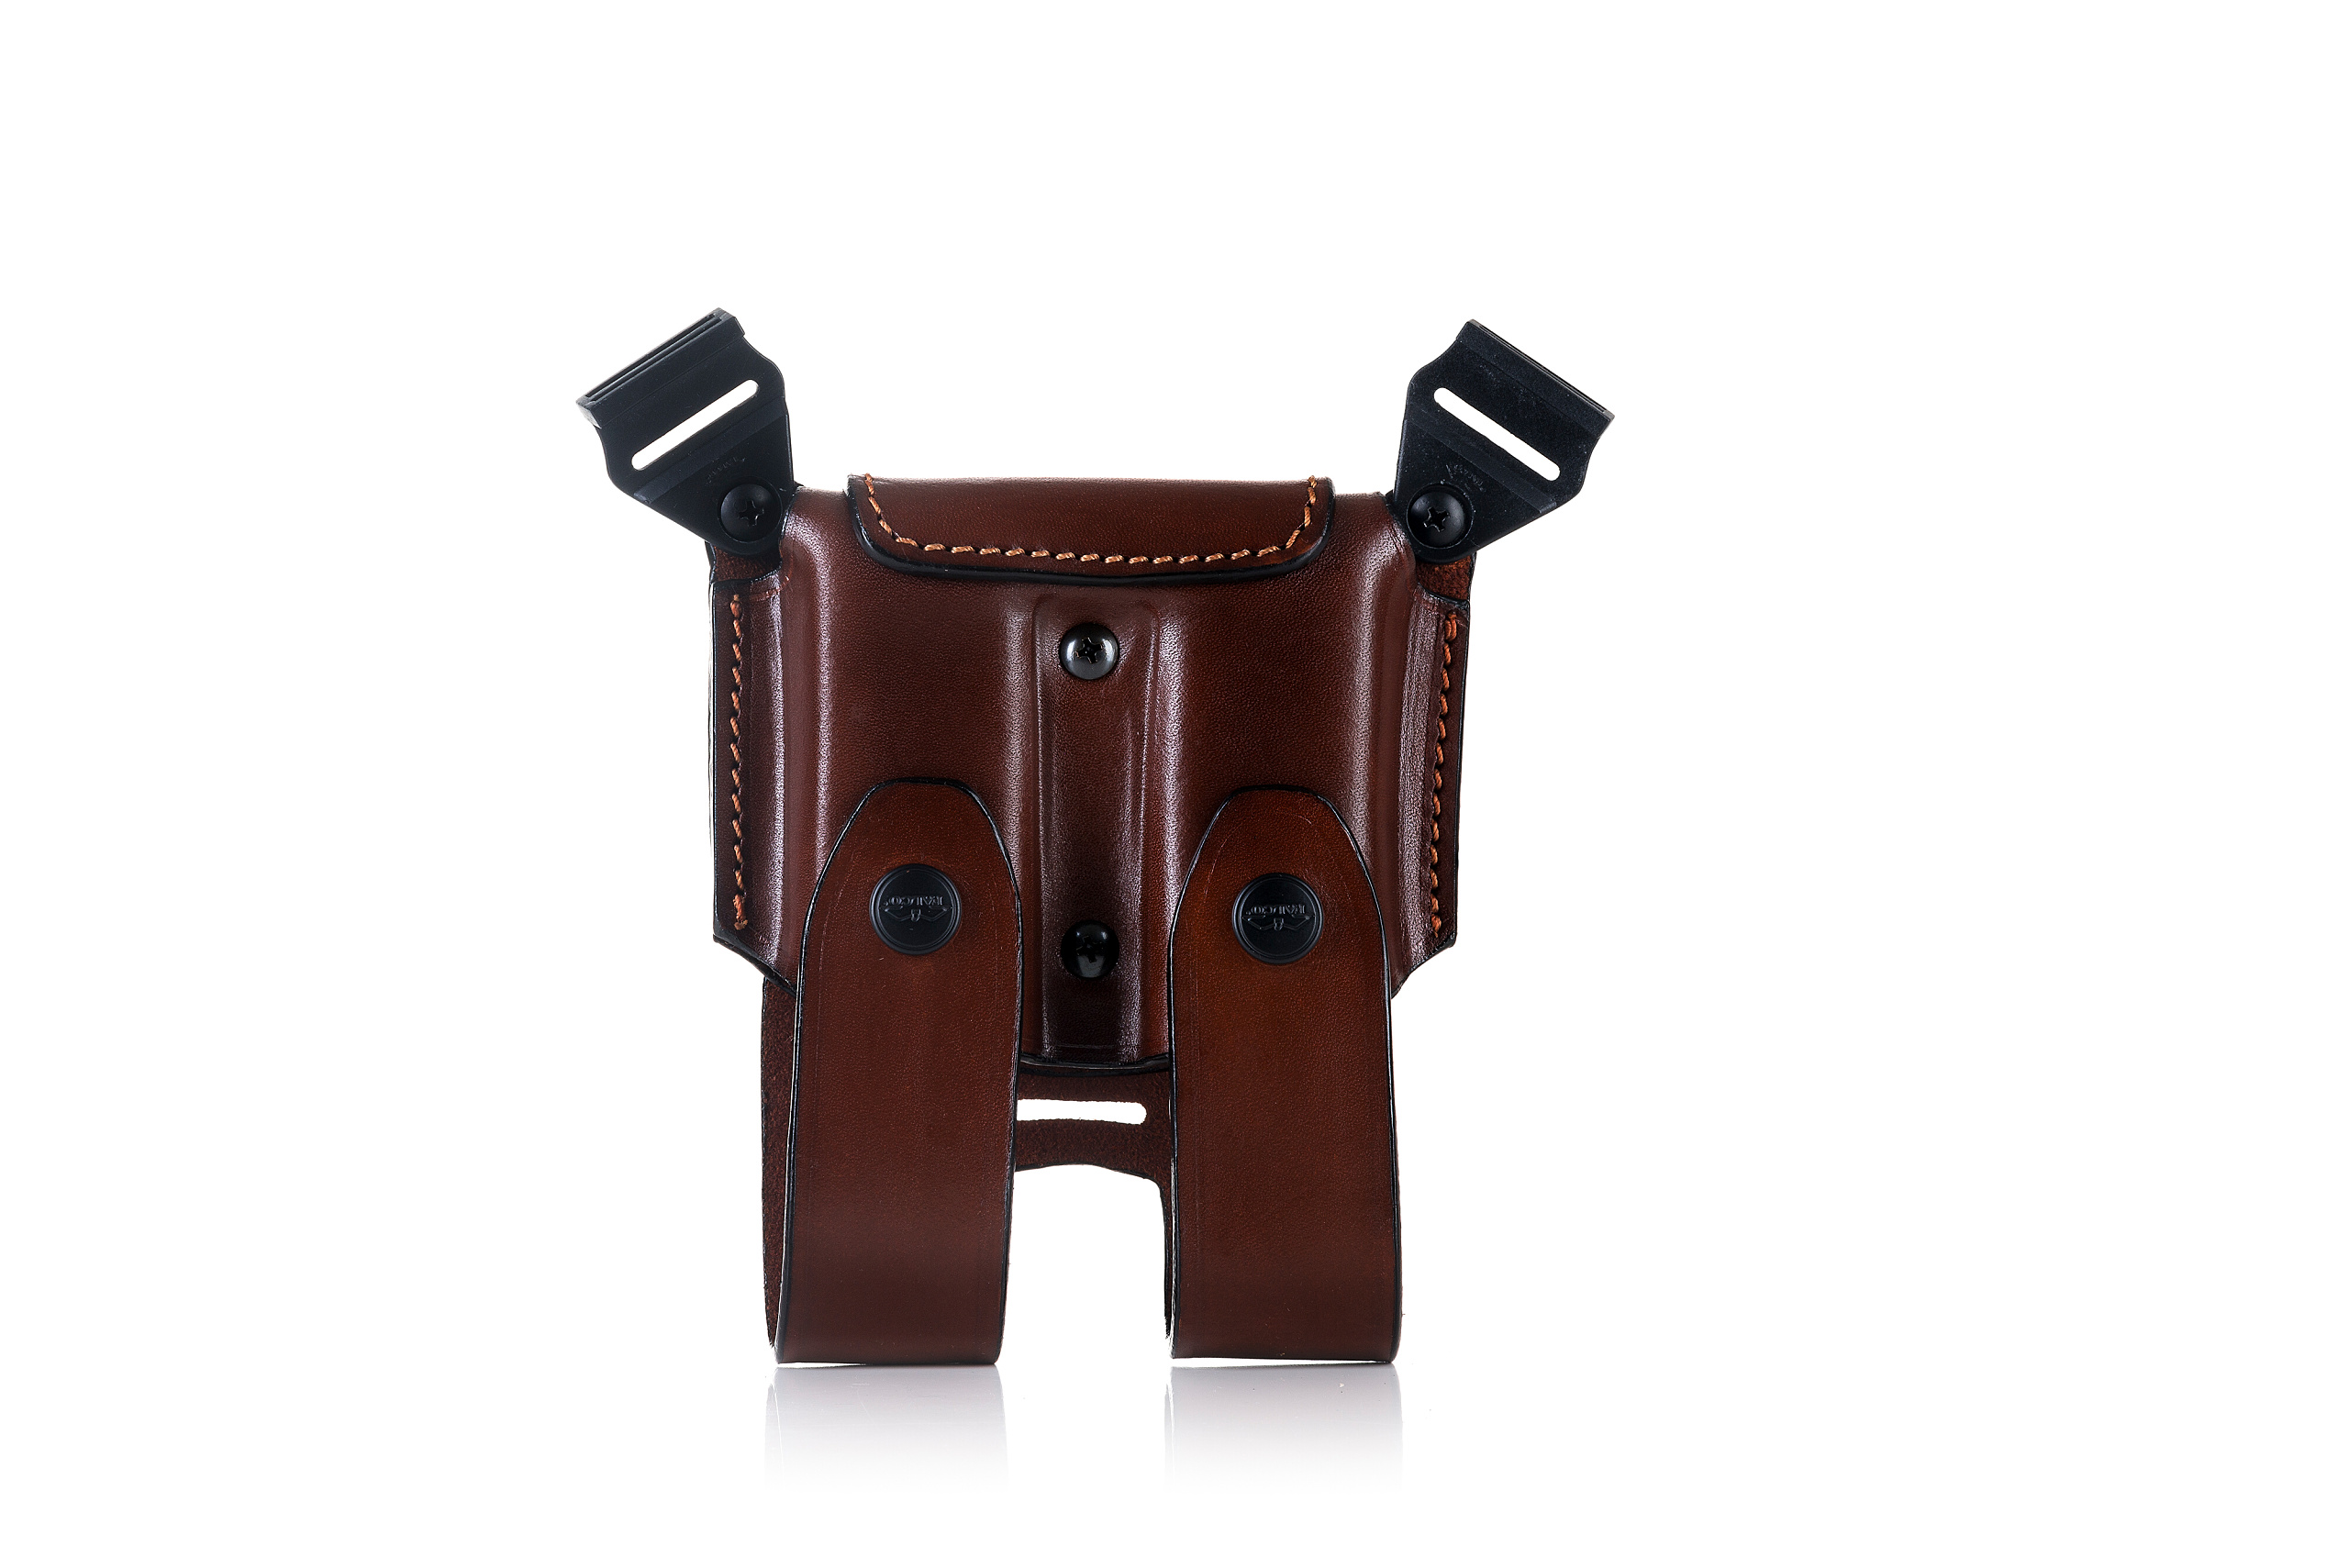 Police Duty or Off Duty Magazine Holster - C.T. Designs